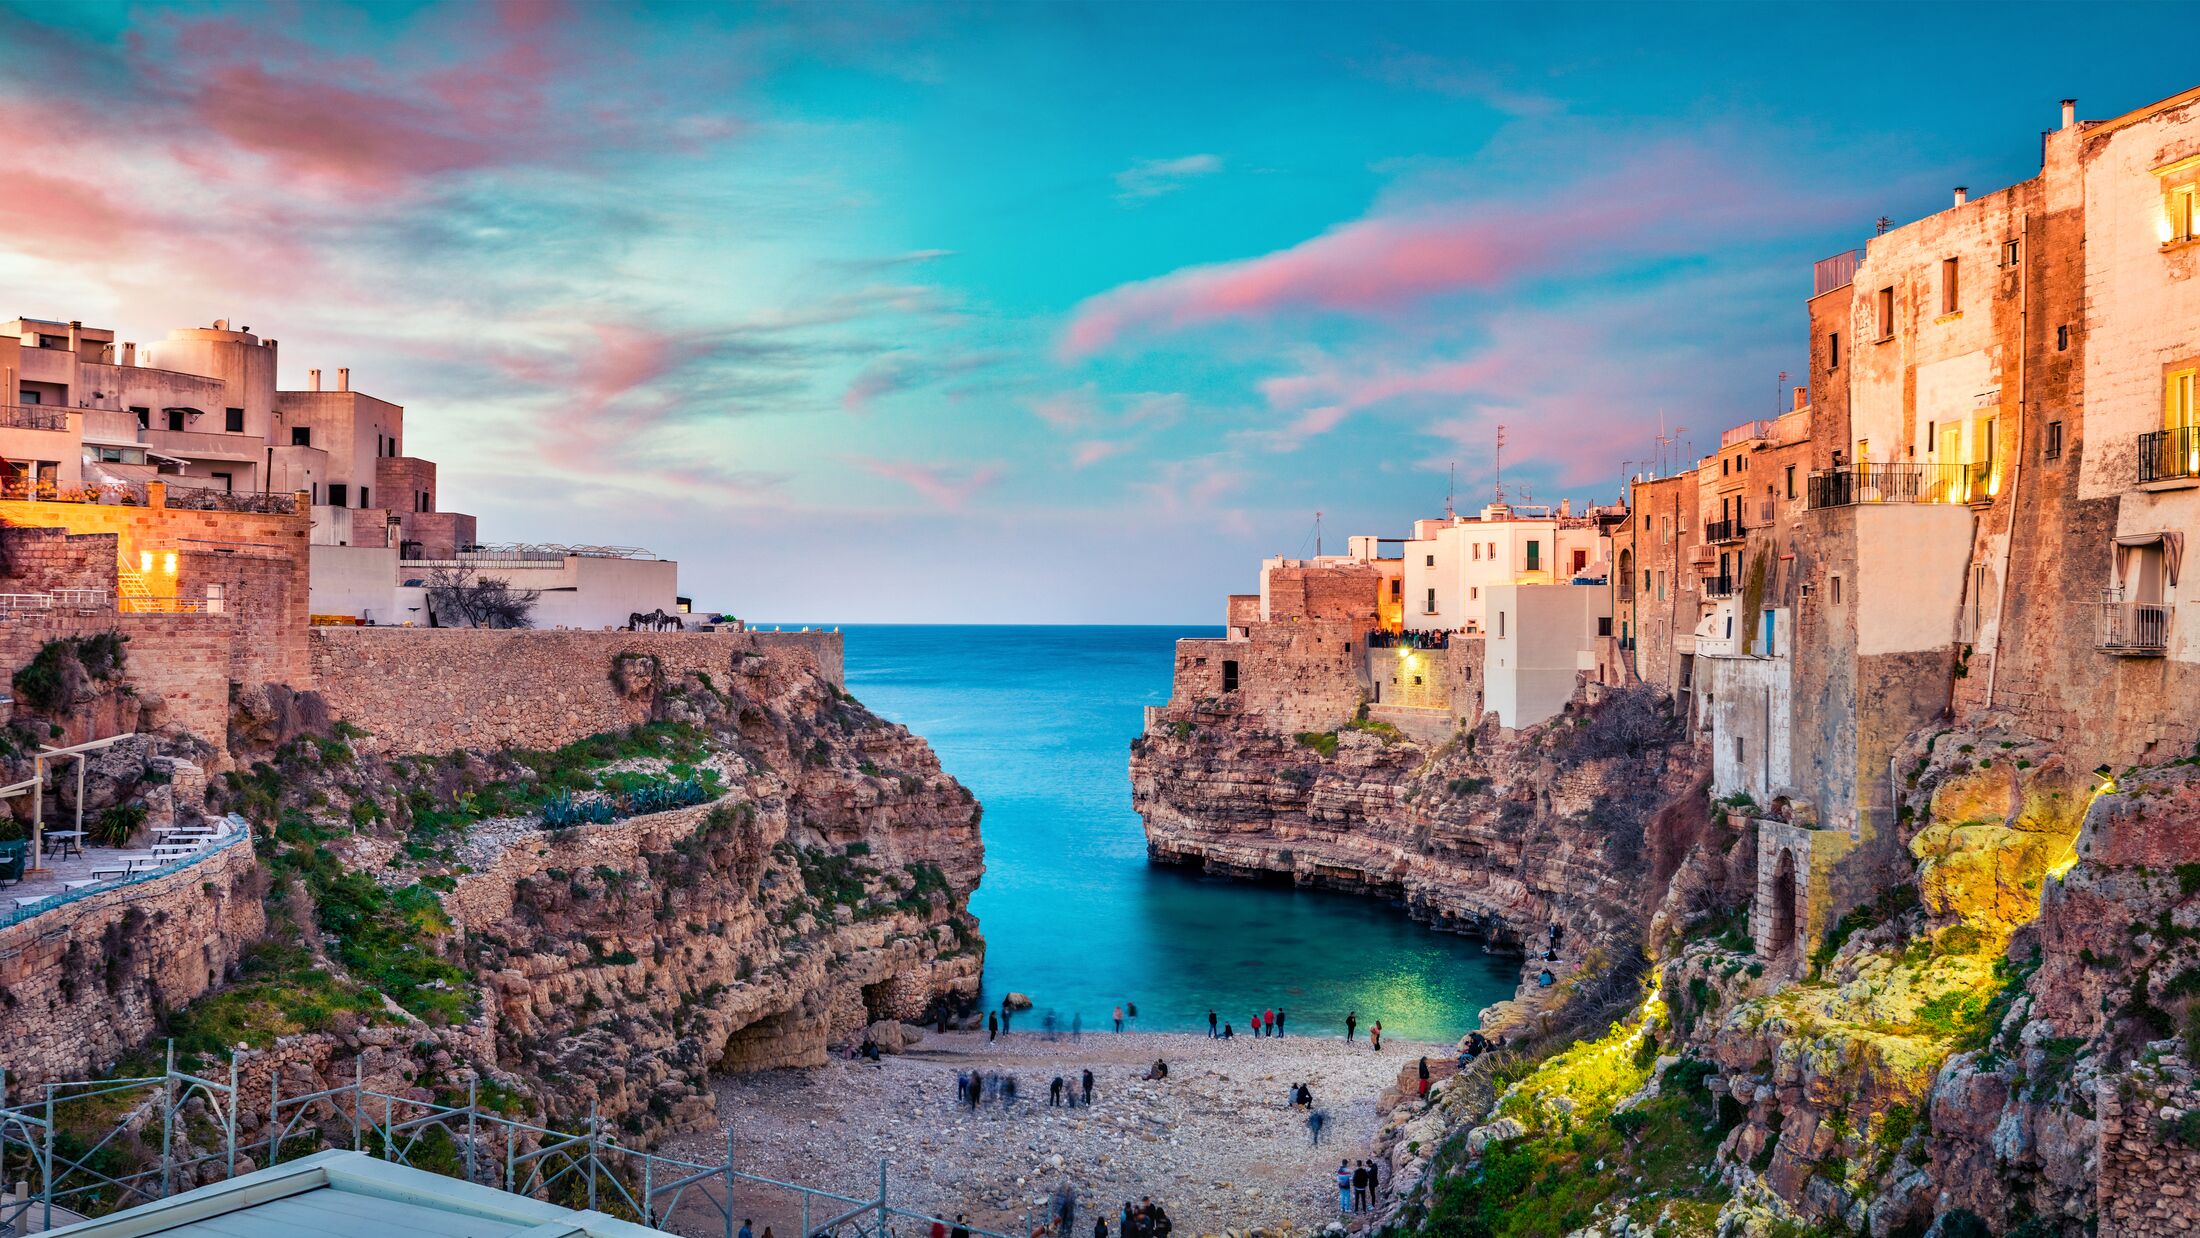 Spectacular spring cityscape of Polignano a Mare town, Puglia region, Italy, Europe. Colorful evening seascape of Adriatic sea. Traveling concept background.